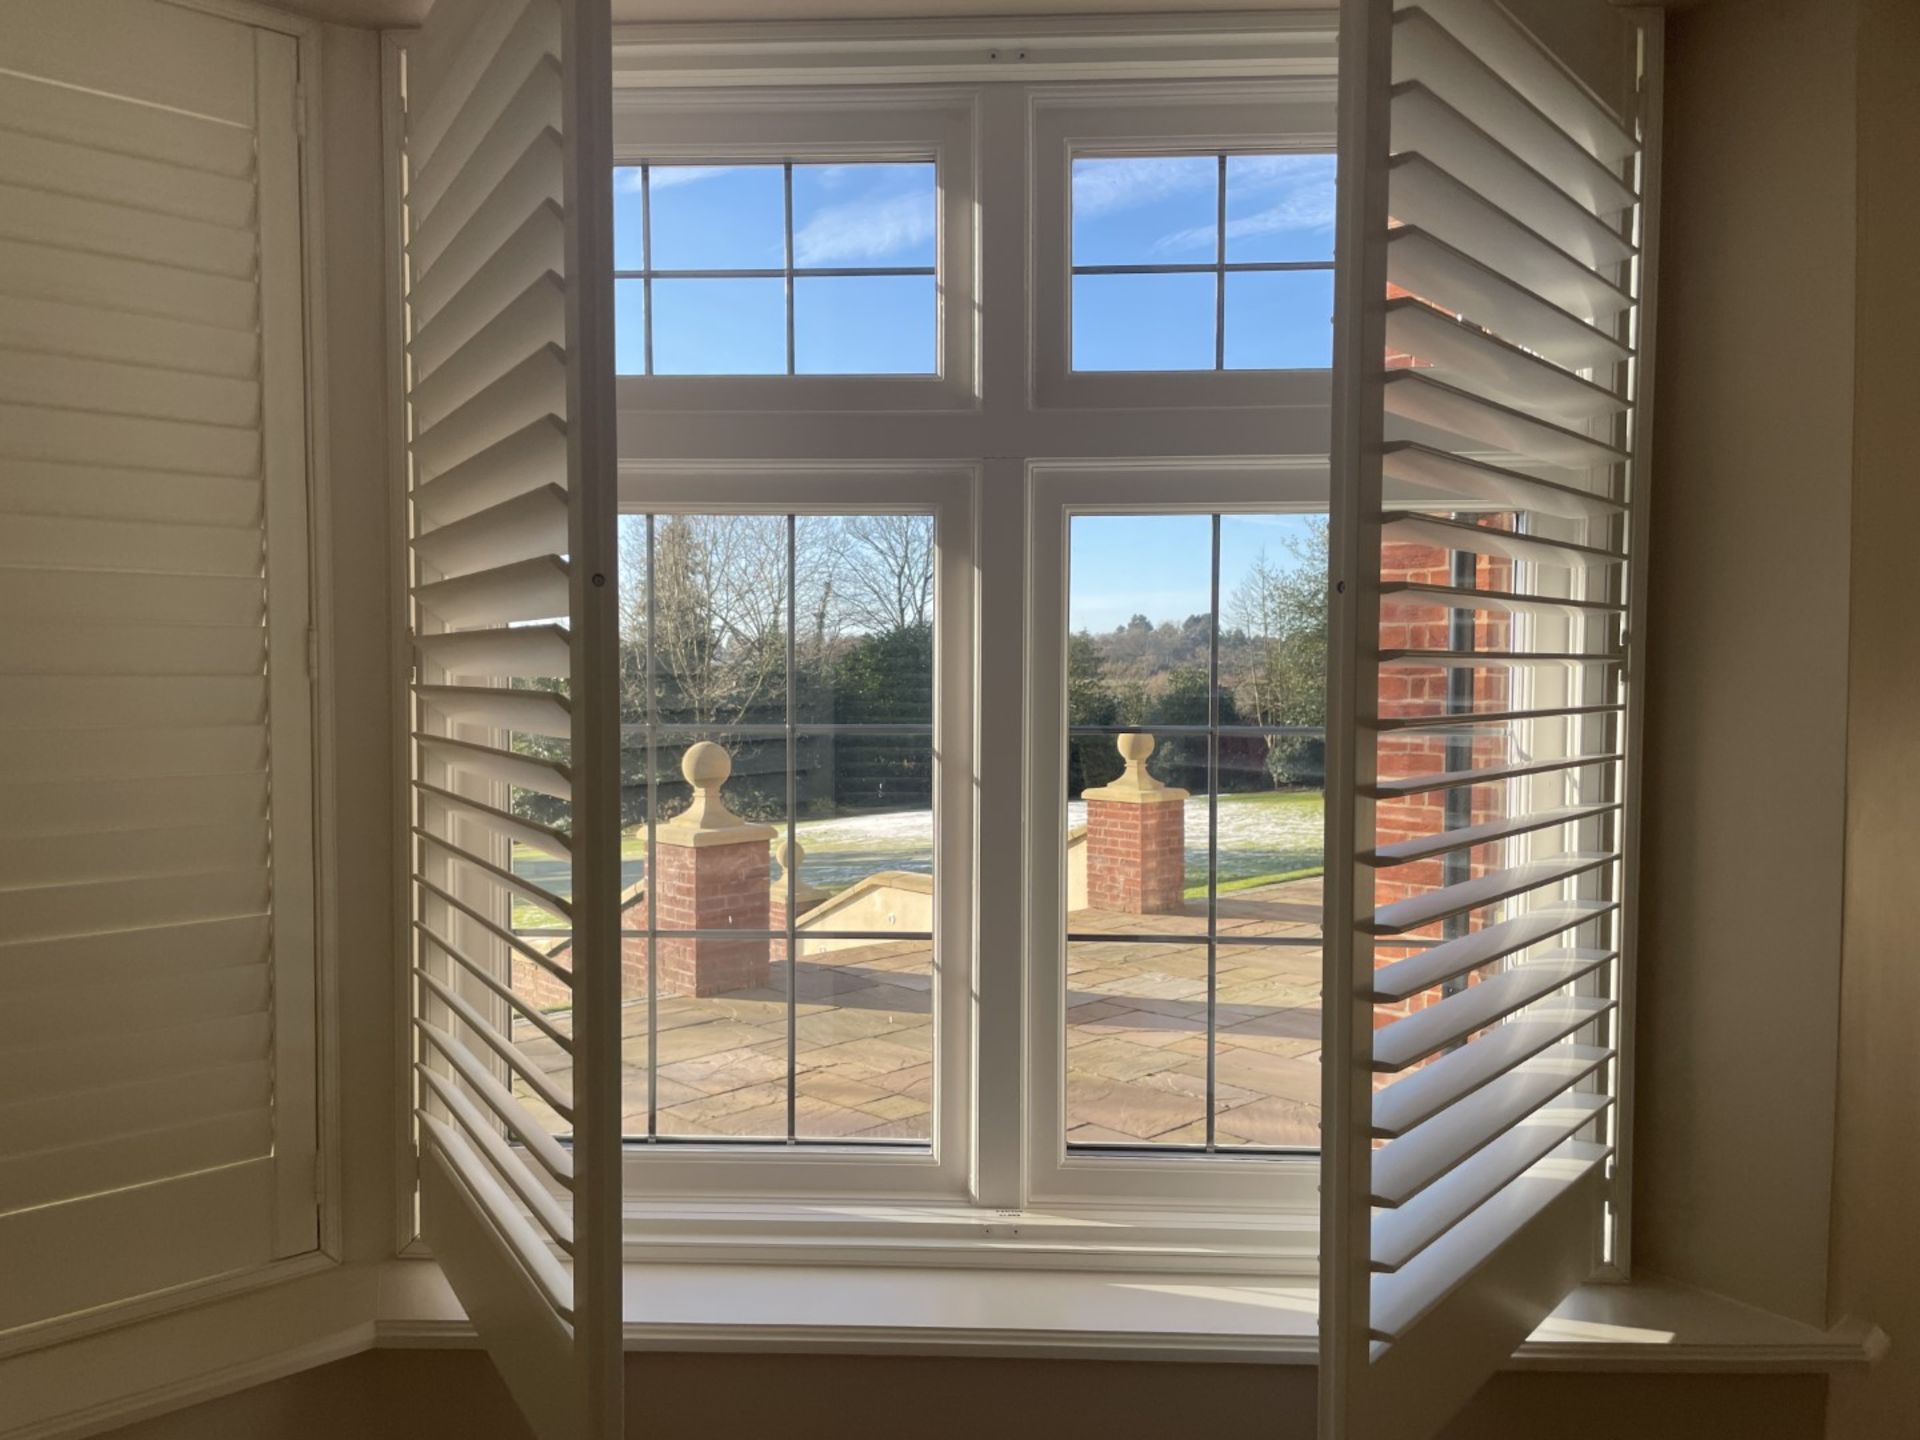 1 x Hardwood Timber Double Glazed Window Frames fitted with Shutter Blinds, In White - Ref: PAN104 - Image 7 of 12